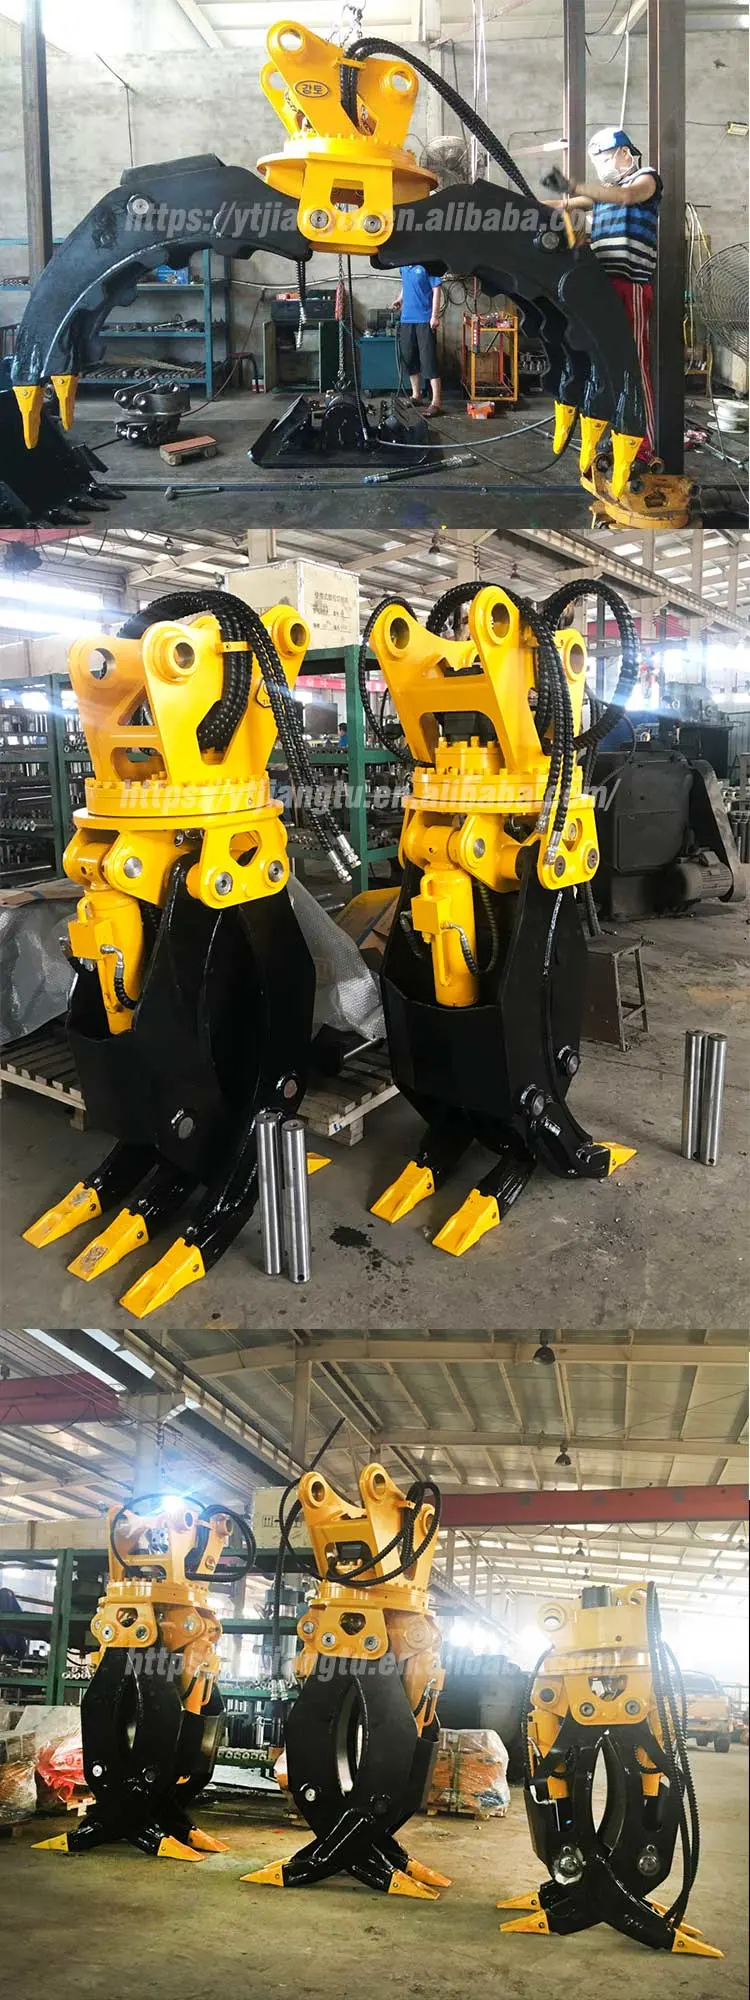 Customized CE Certificated Double Cylinders Log Grab Hydraulic Wood Grapple